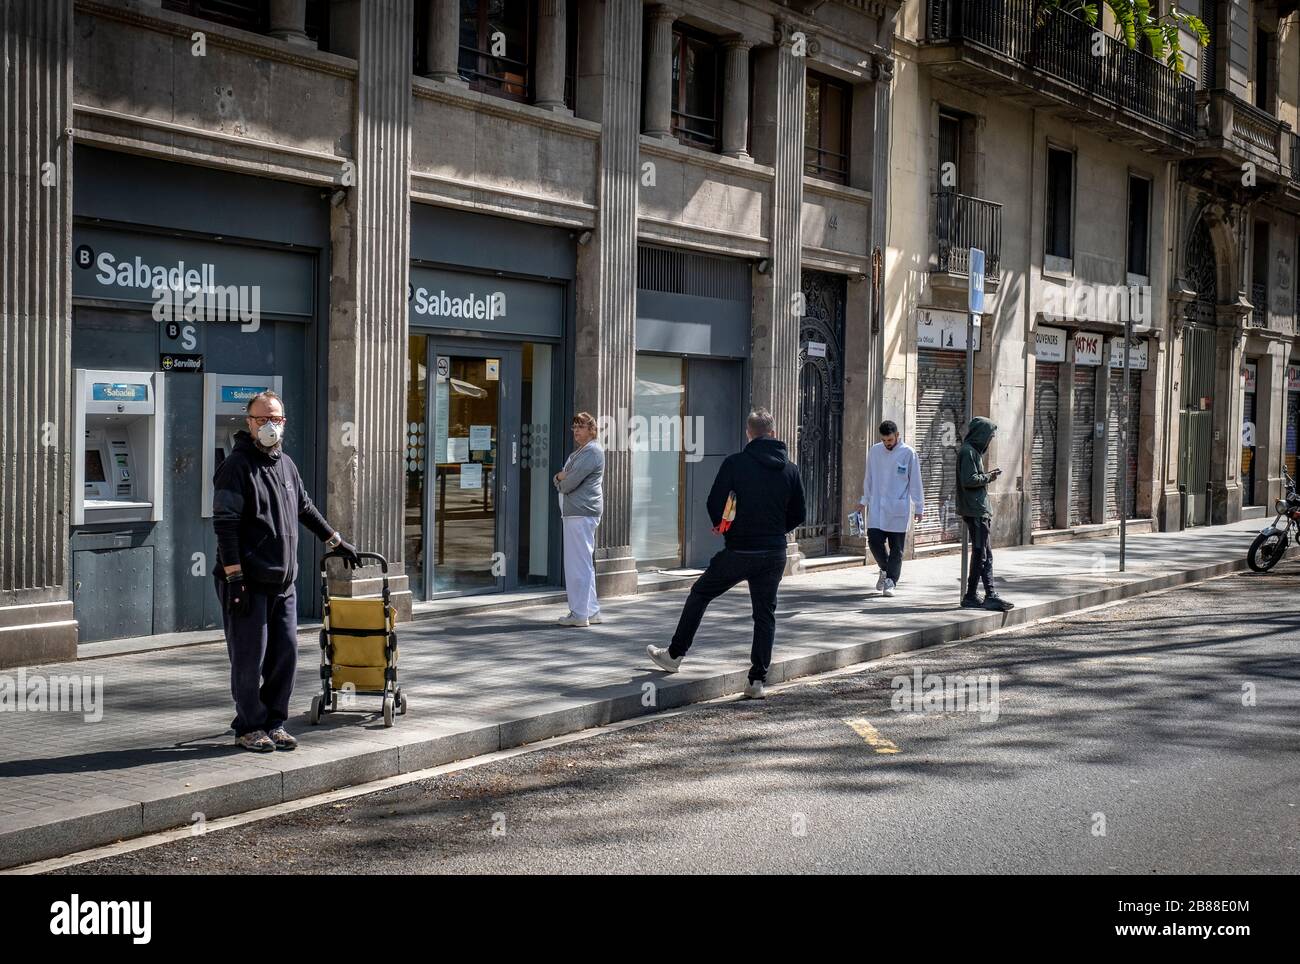 Several people wait in front of a bank while keeping safe distance due to the spread of the coronavirus.Barcelona faces the sixth consecutive day of home confinement and distancing between people due to the spread of the Covid-19 coronavirus. Stock Photo